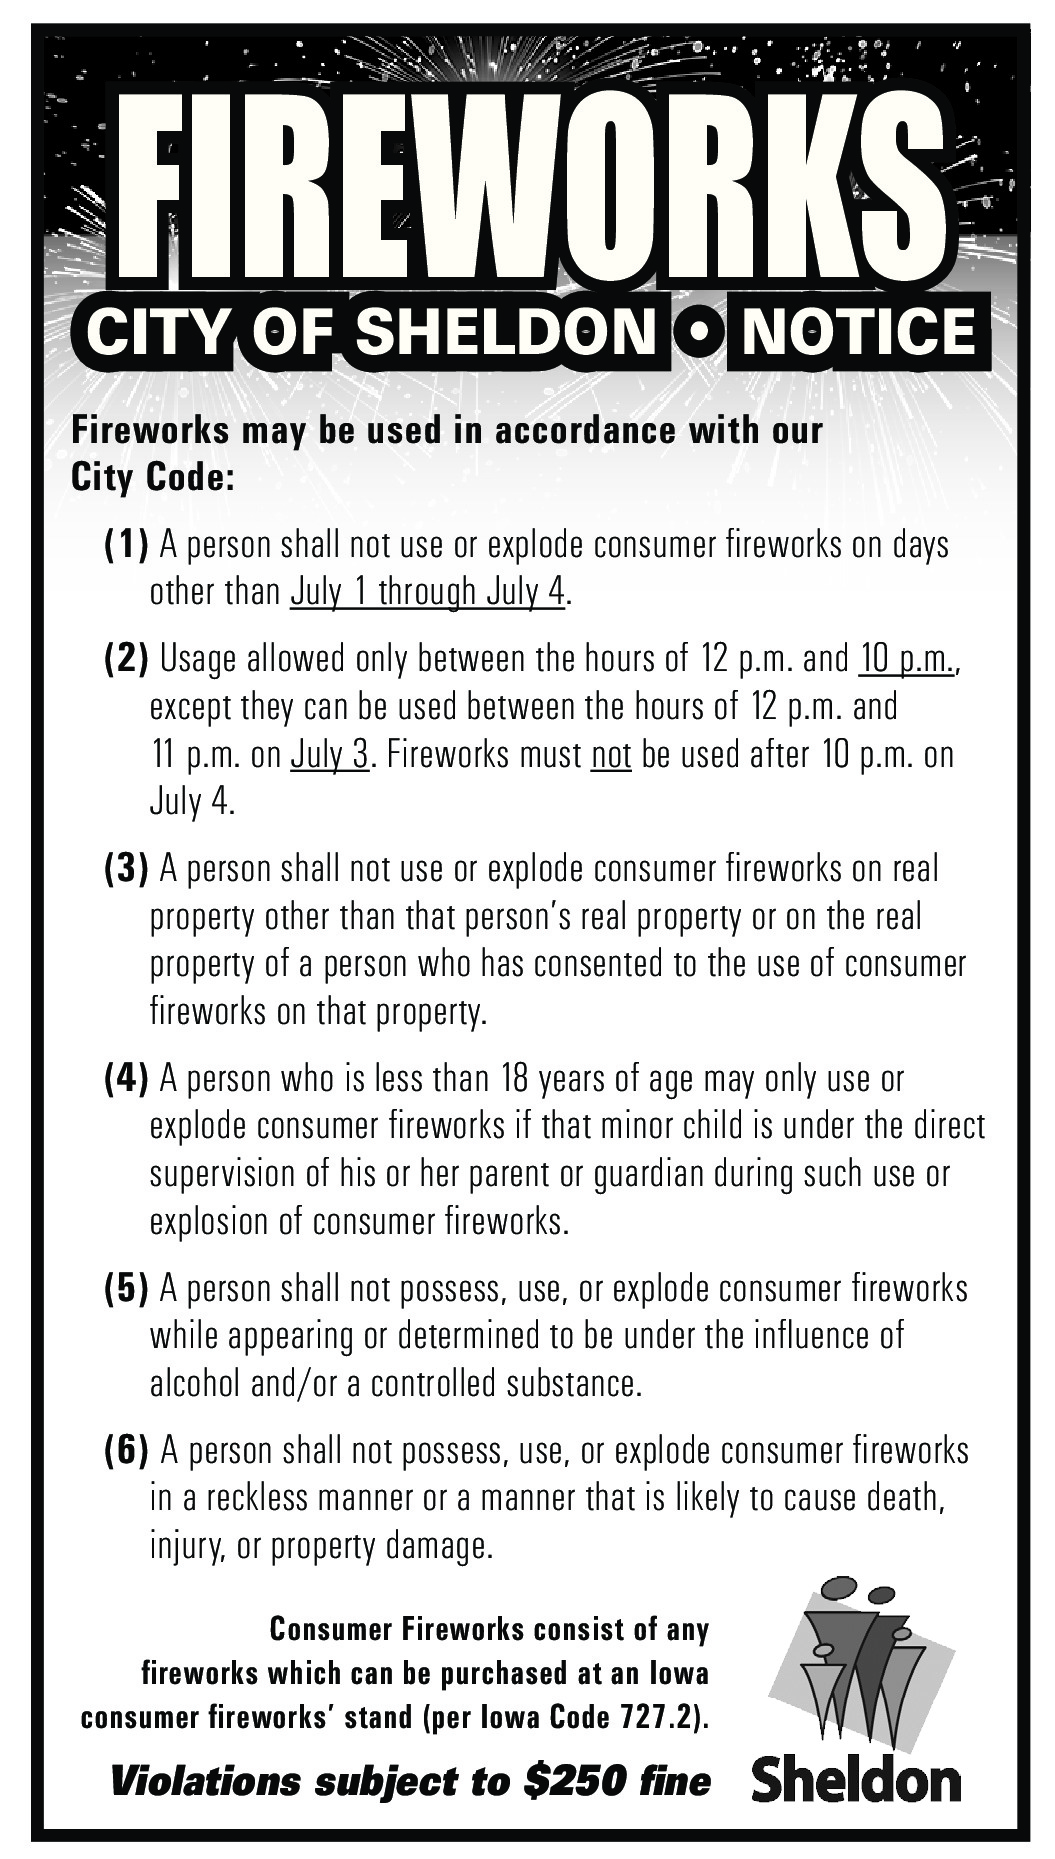 Fireworks only from July 1 to July 4.